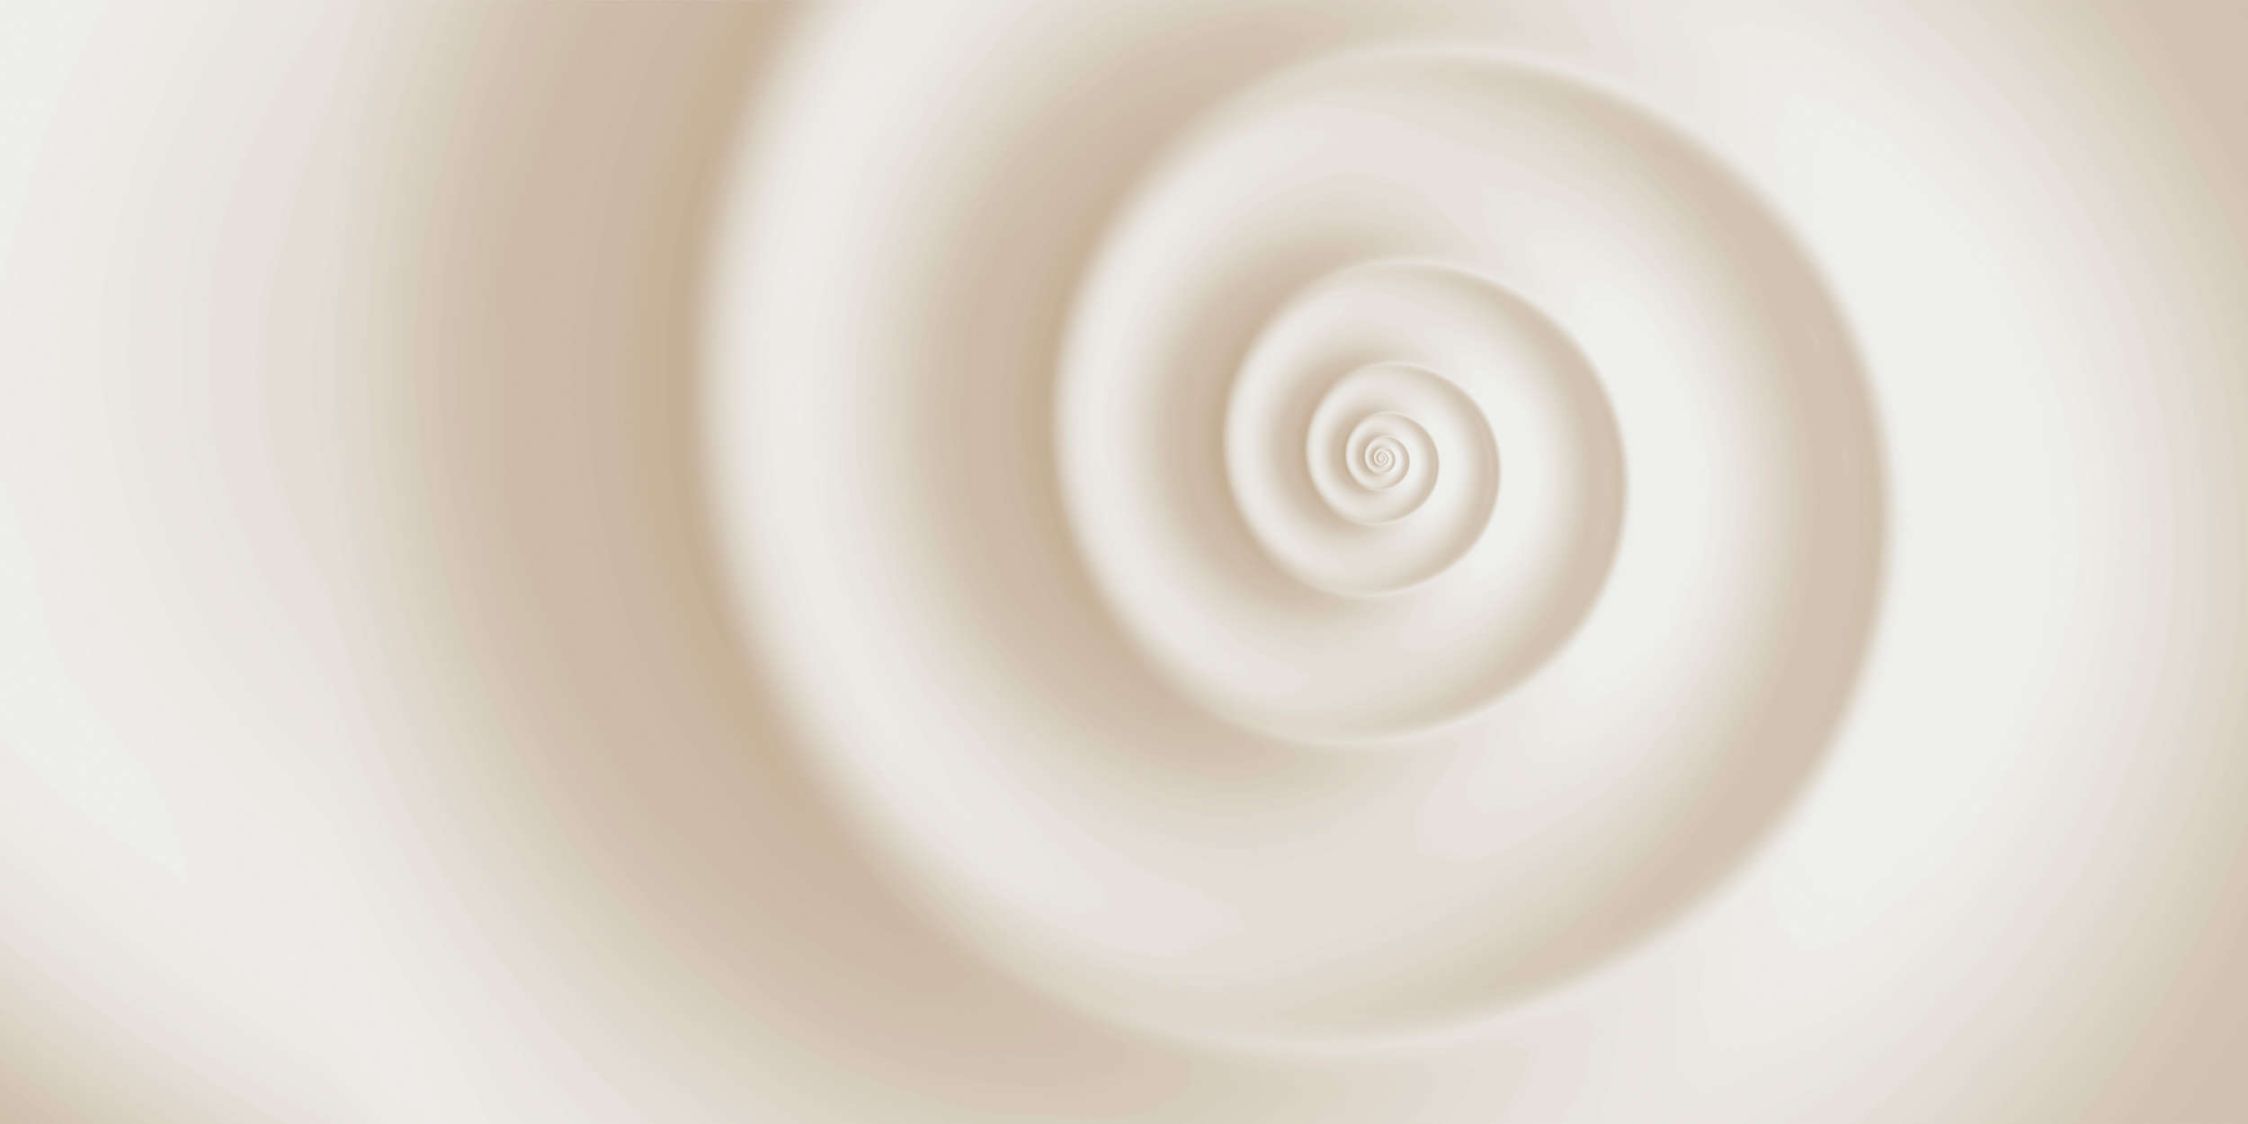             Photo wallpaper »swirl« - Light spiral pattern - Smooth, slightly pearlescent non-woven fabric
        